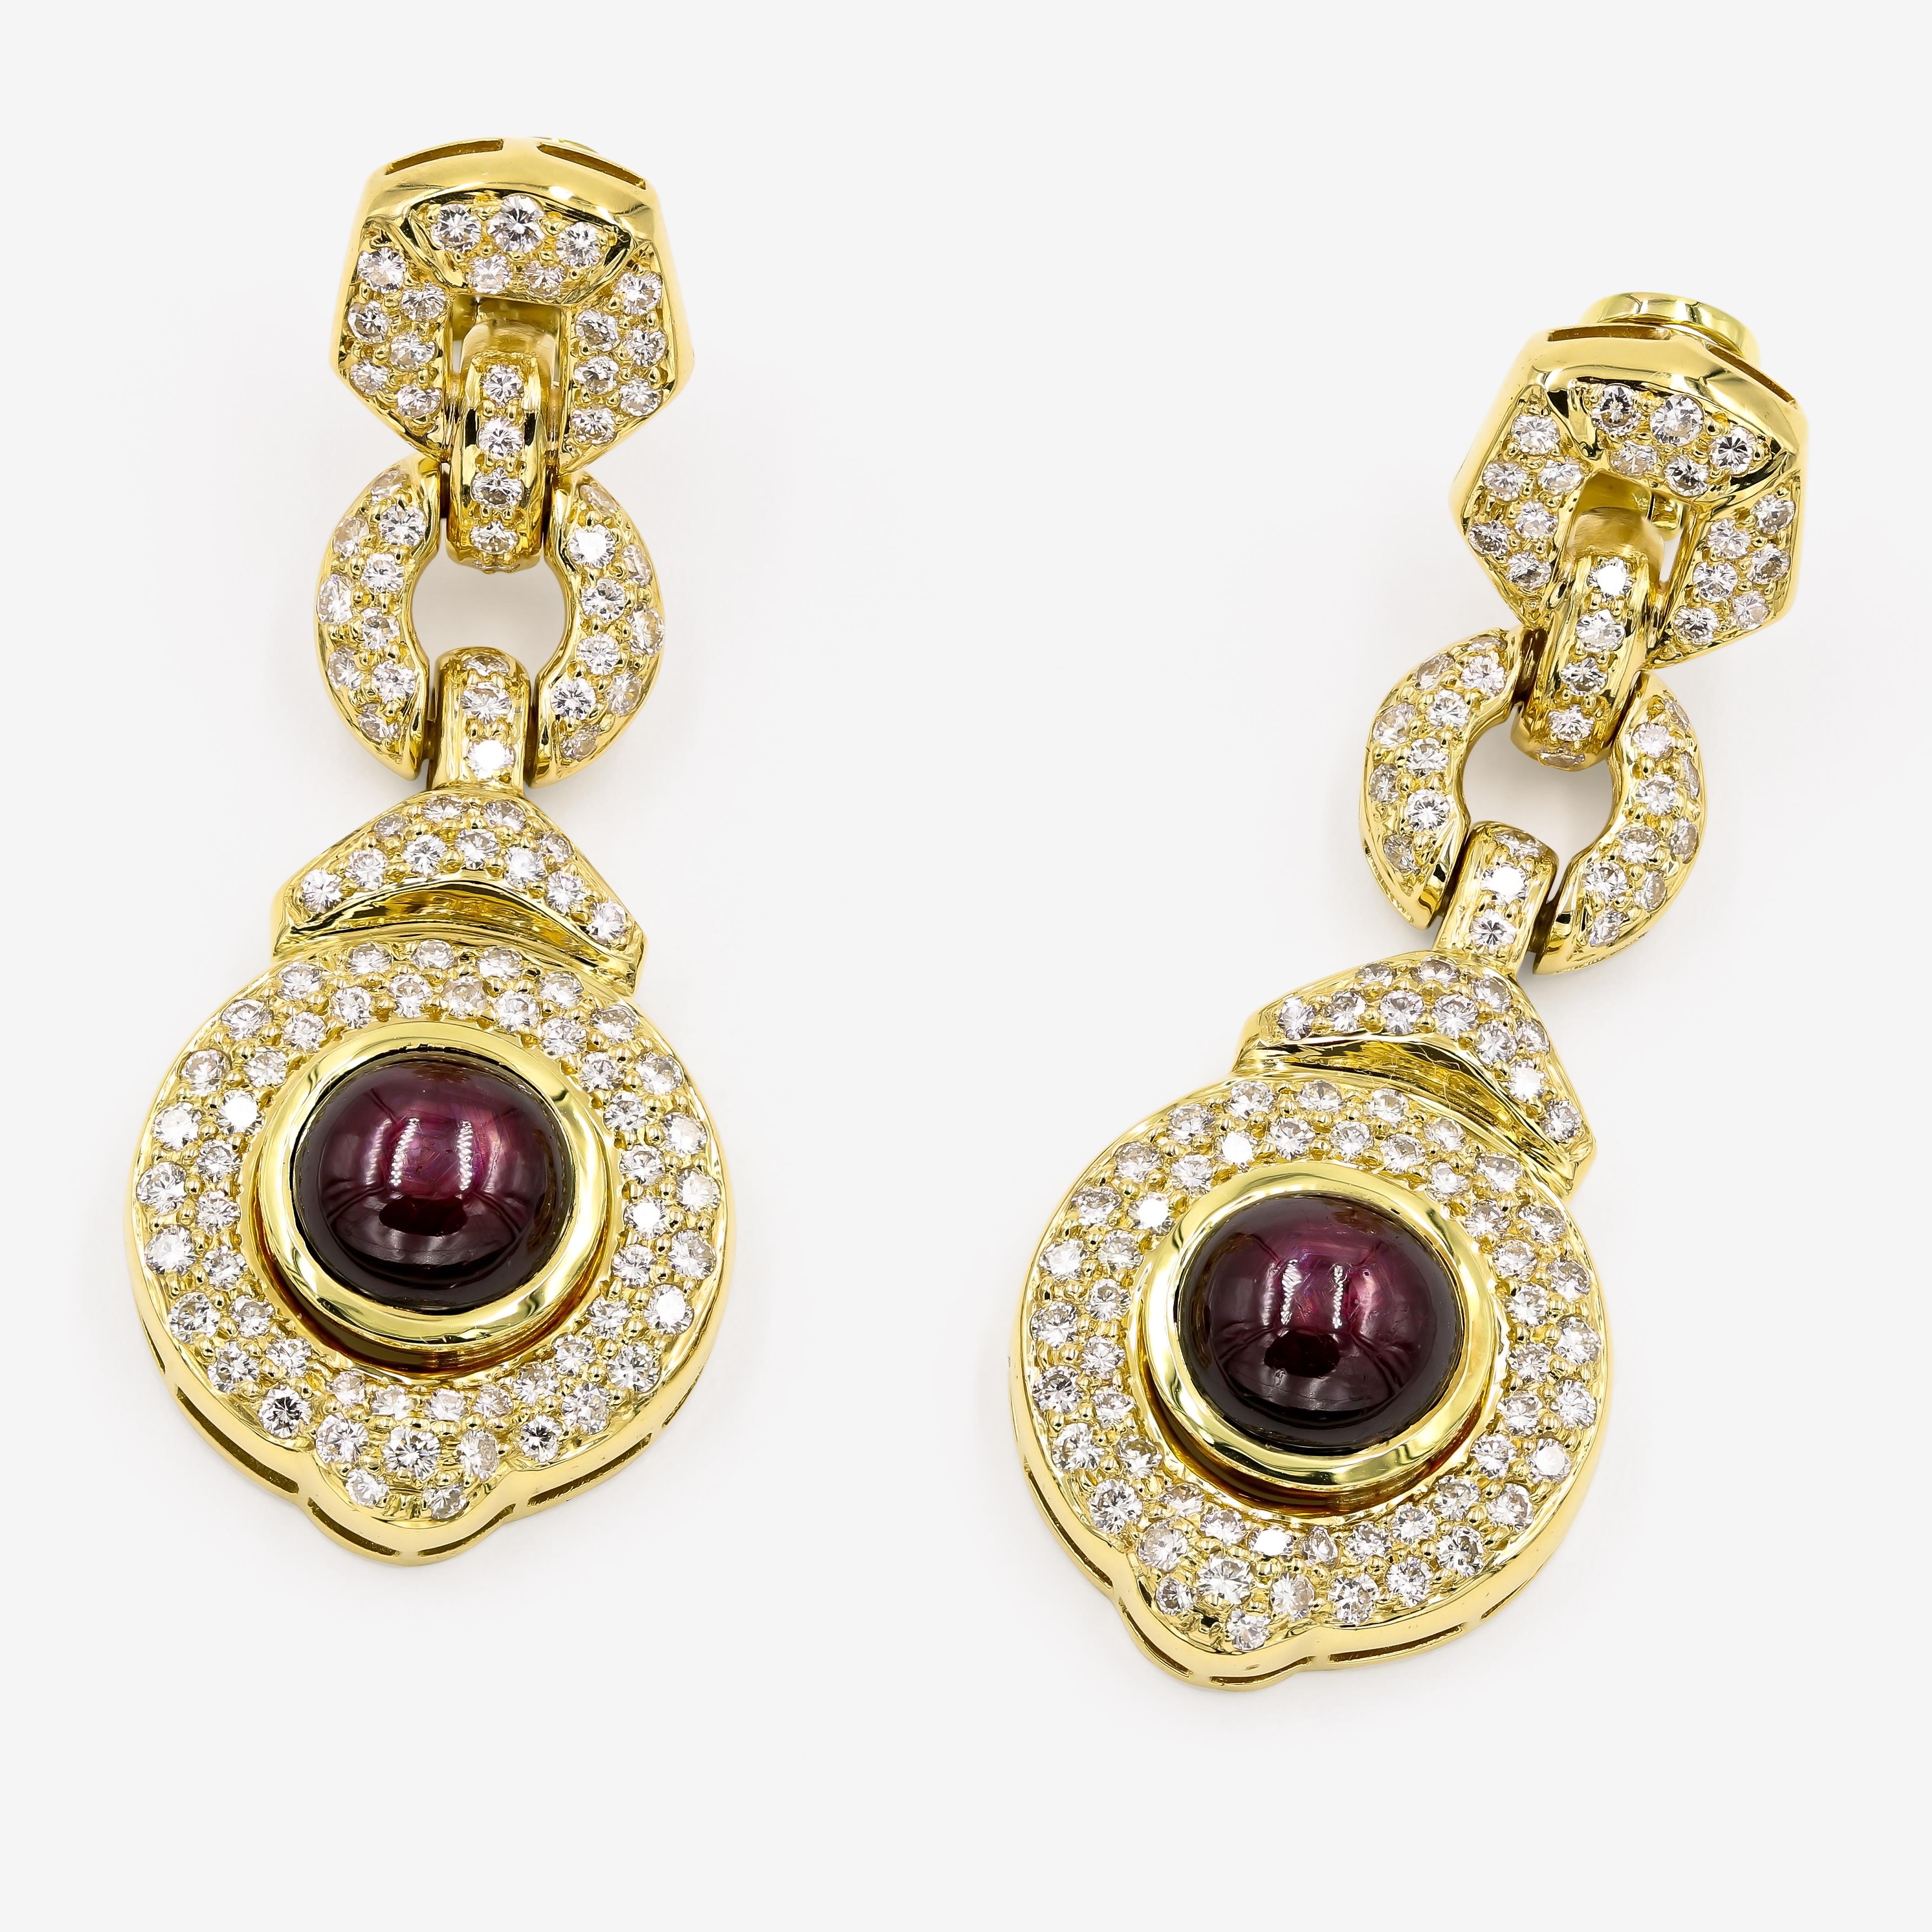 Stunning 16.97cts. t.w. cabochon cut star ruby earrings in 18kt. yellow gold with 206 round diamonds approximately 4.75cts. t.w. Designed by Dennis Lampert

 Every Lester Lampert piece will arrive in an elegant custom jewelry box.